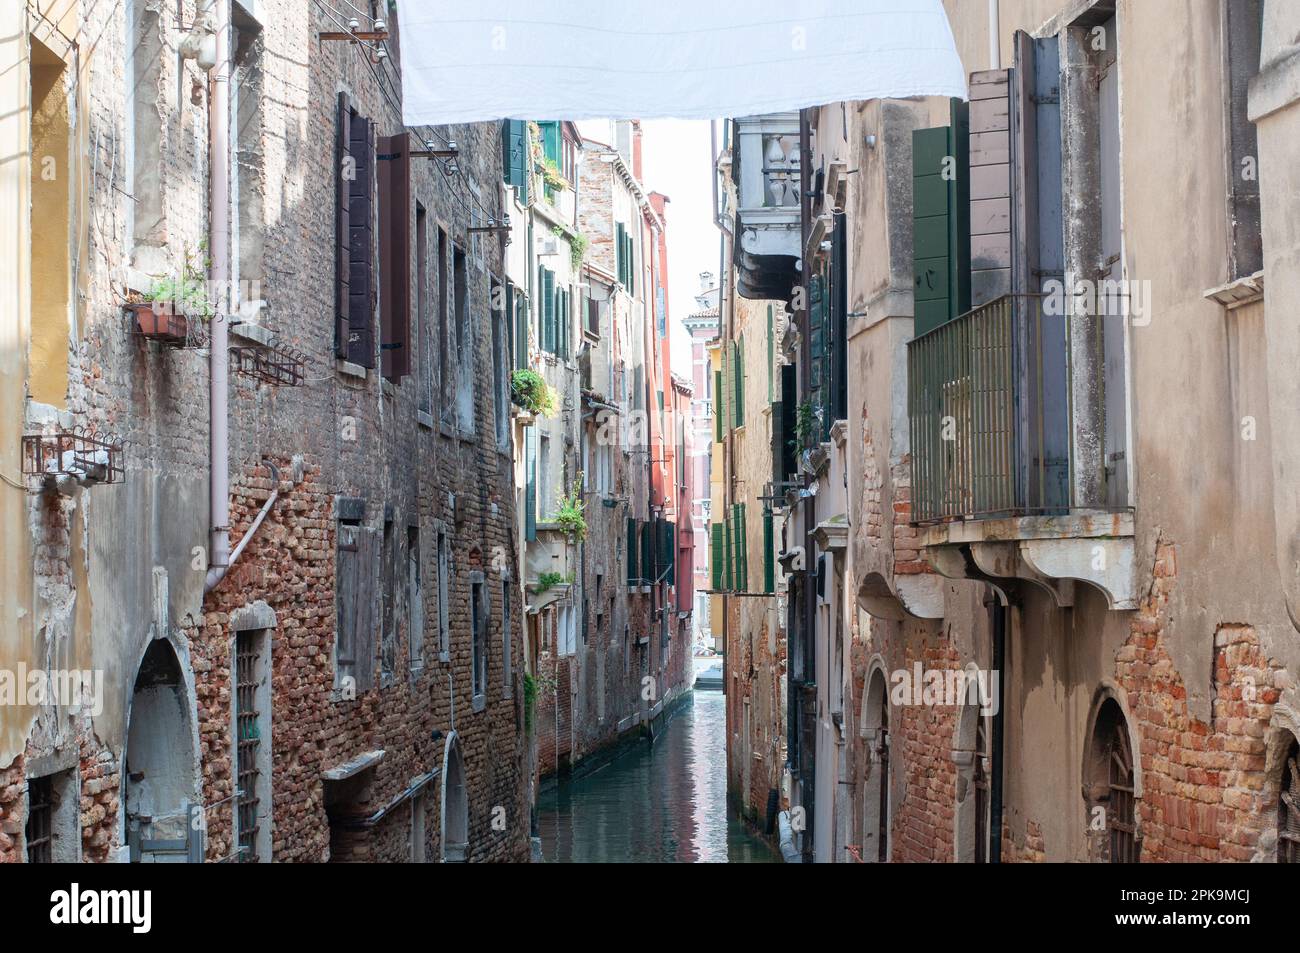 Narrow canal and architectural exteriors, Venice, Italy Stock Photo